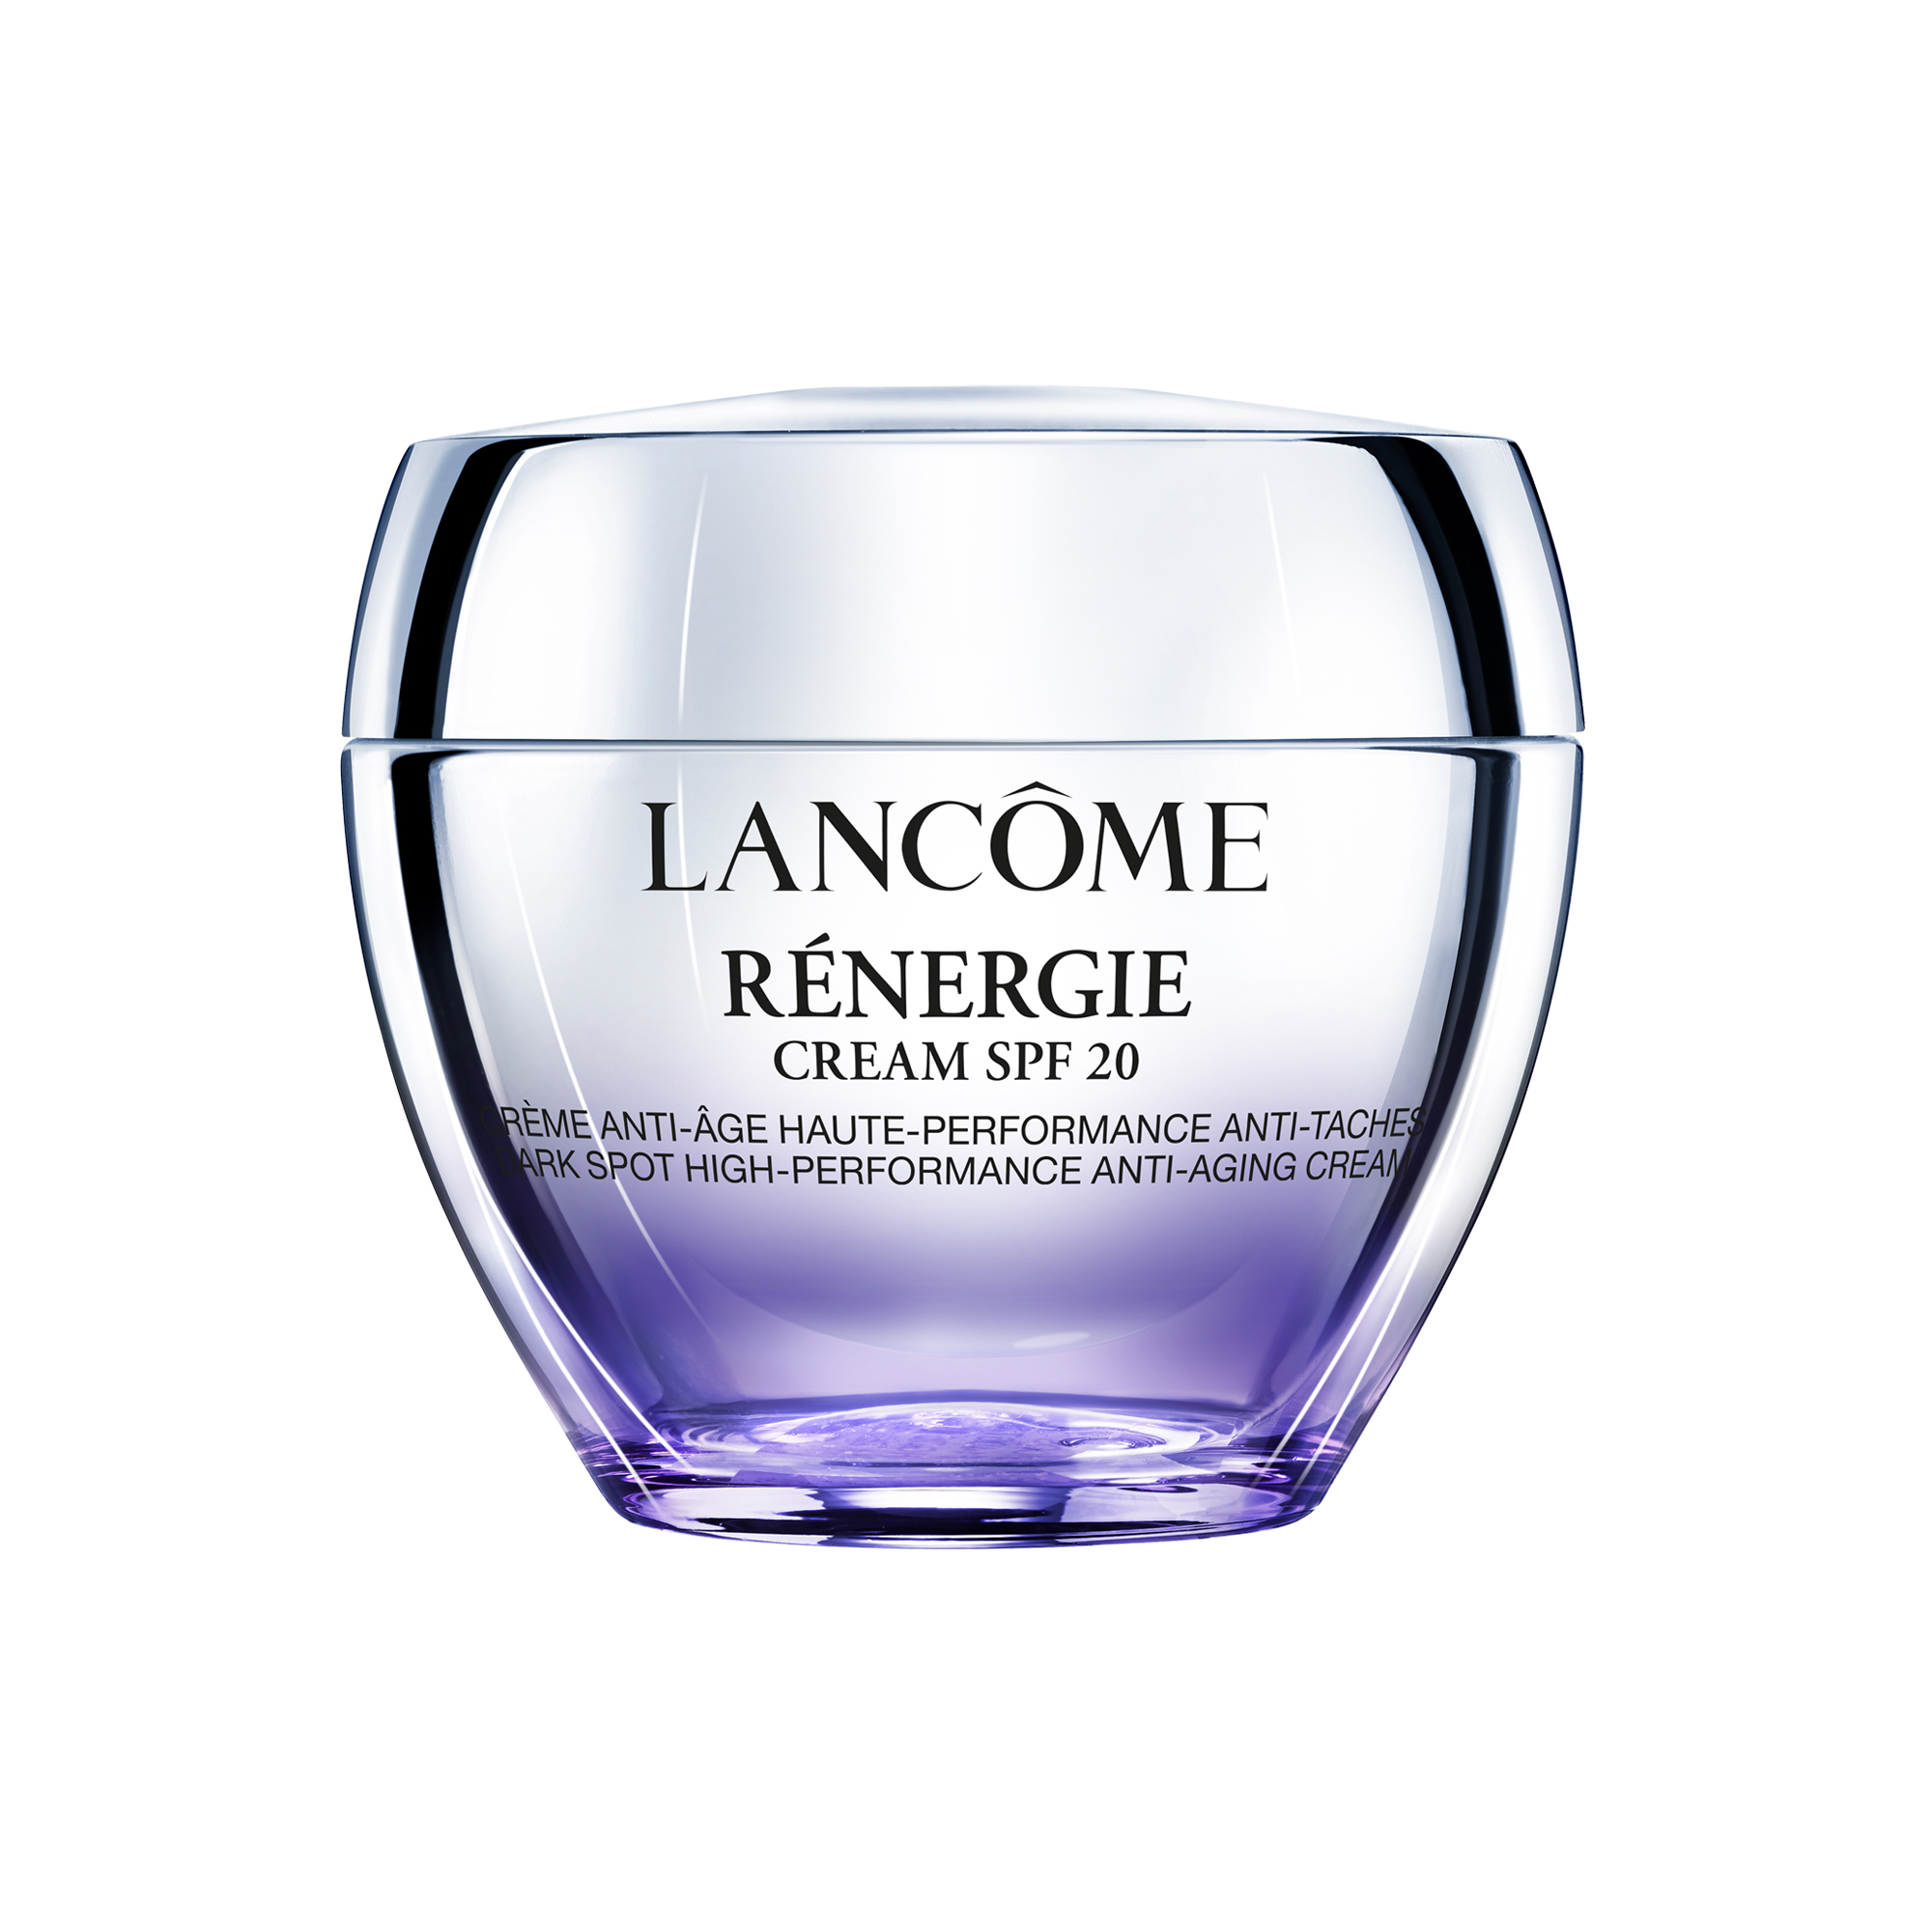 Main product image for Renergie Cream SPF20